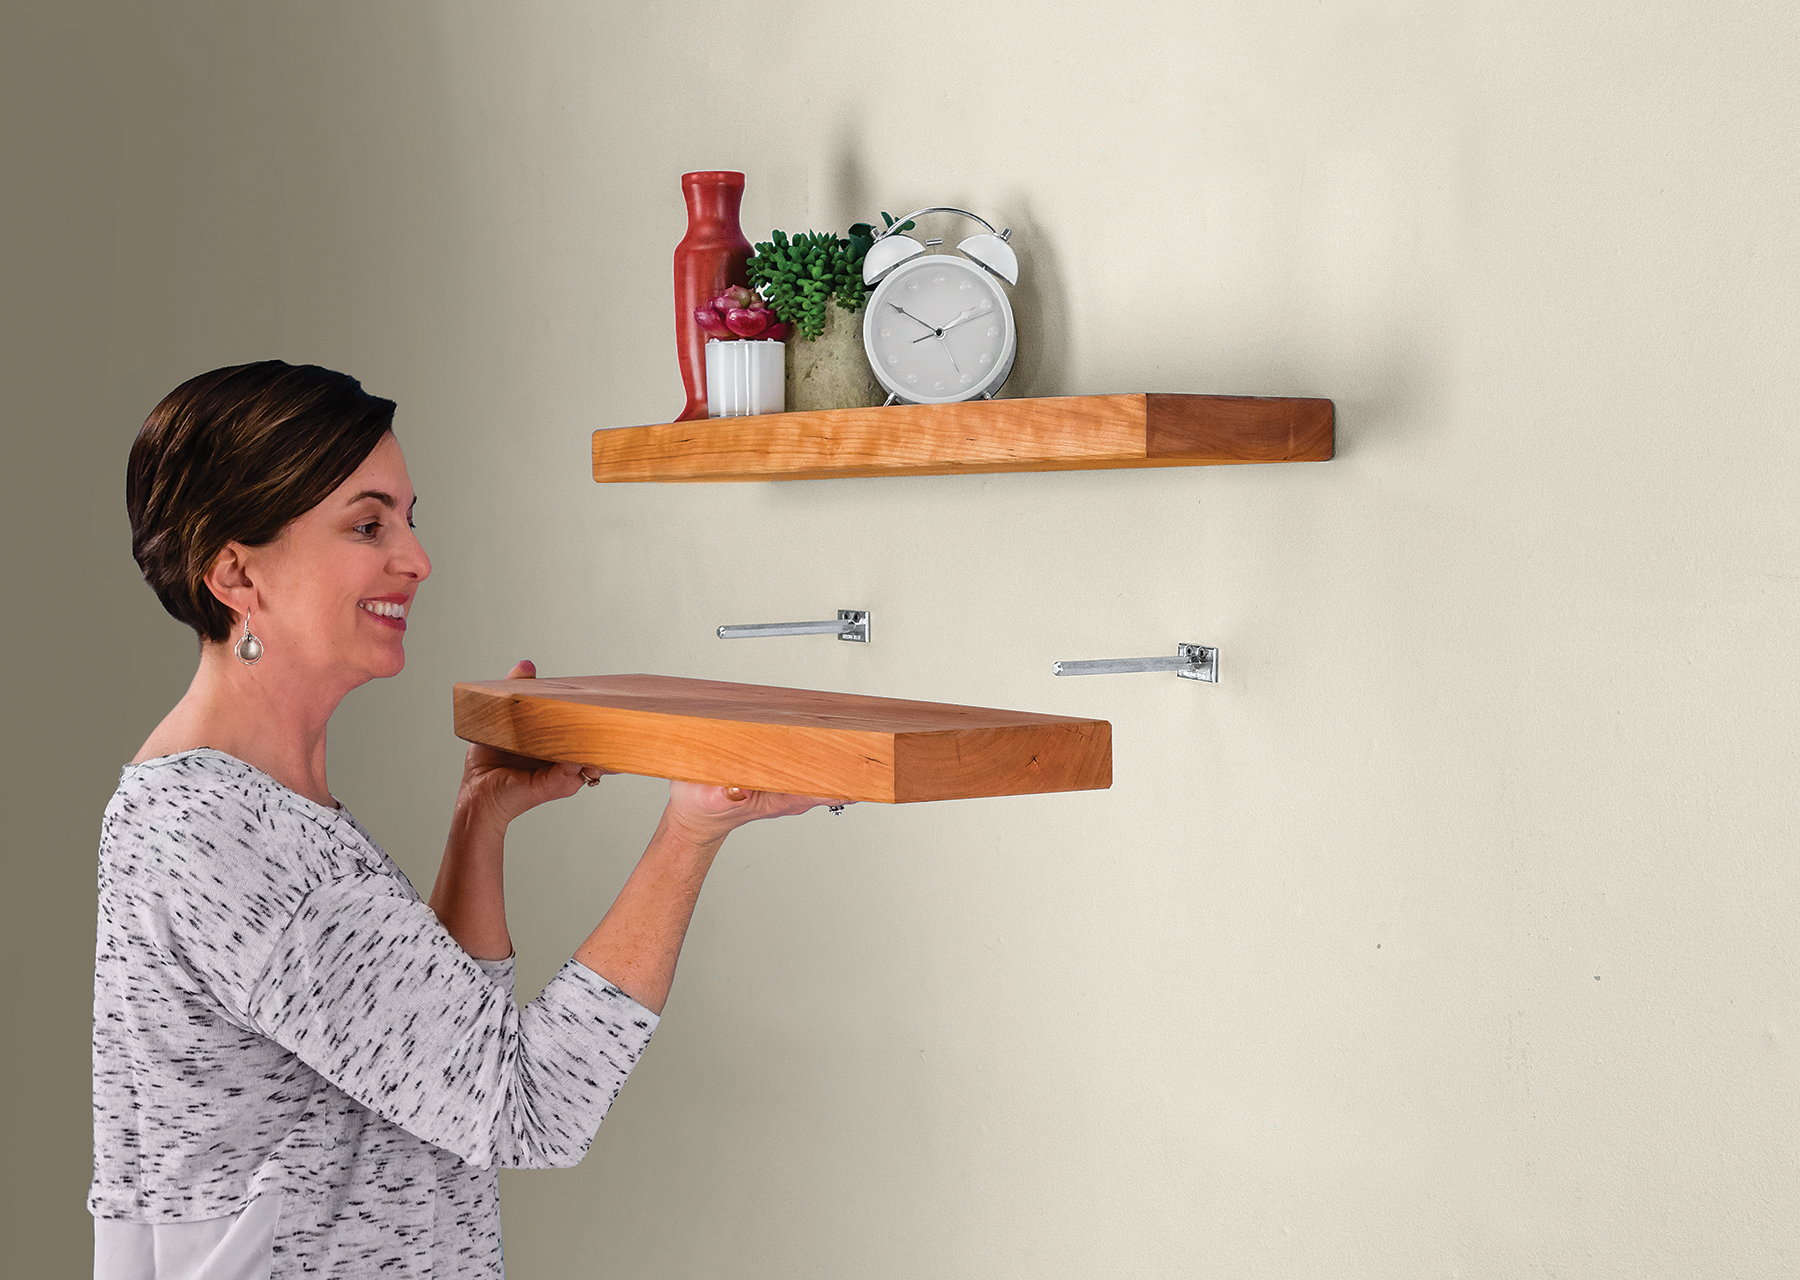 Craft a floating shelf and get the clever “hidden” hardware to mount it at home.